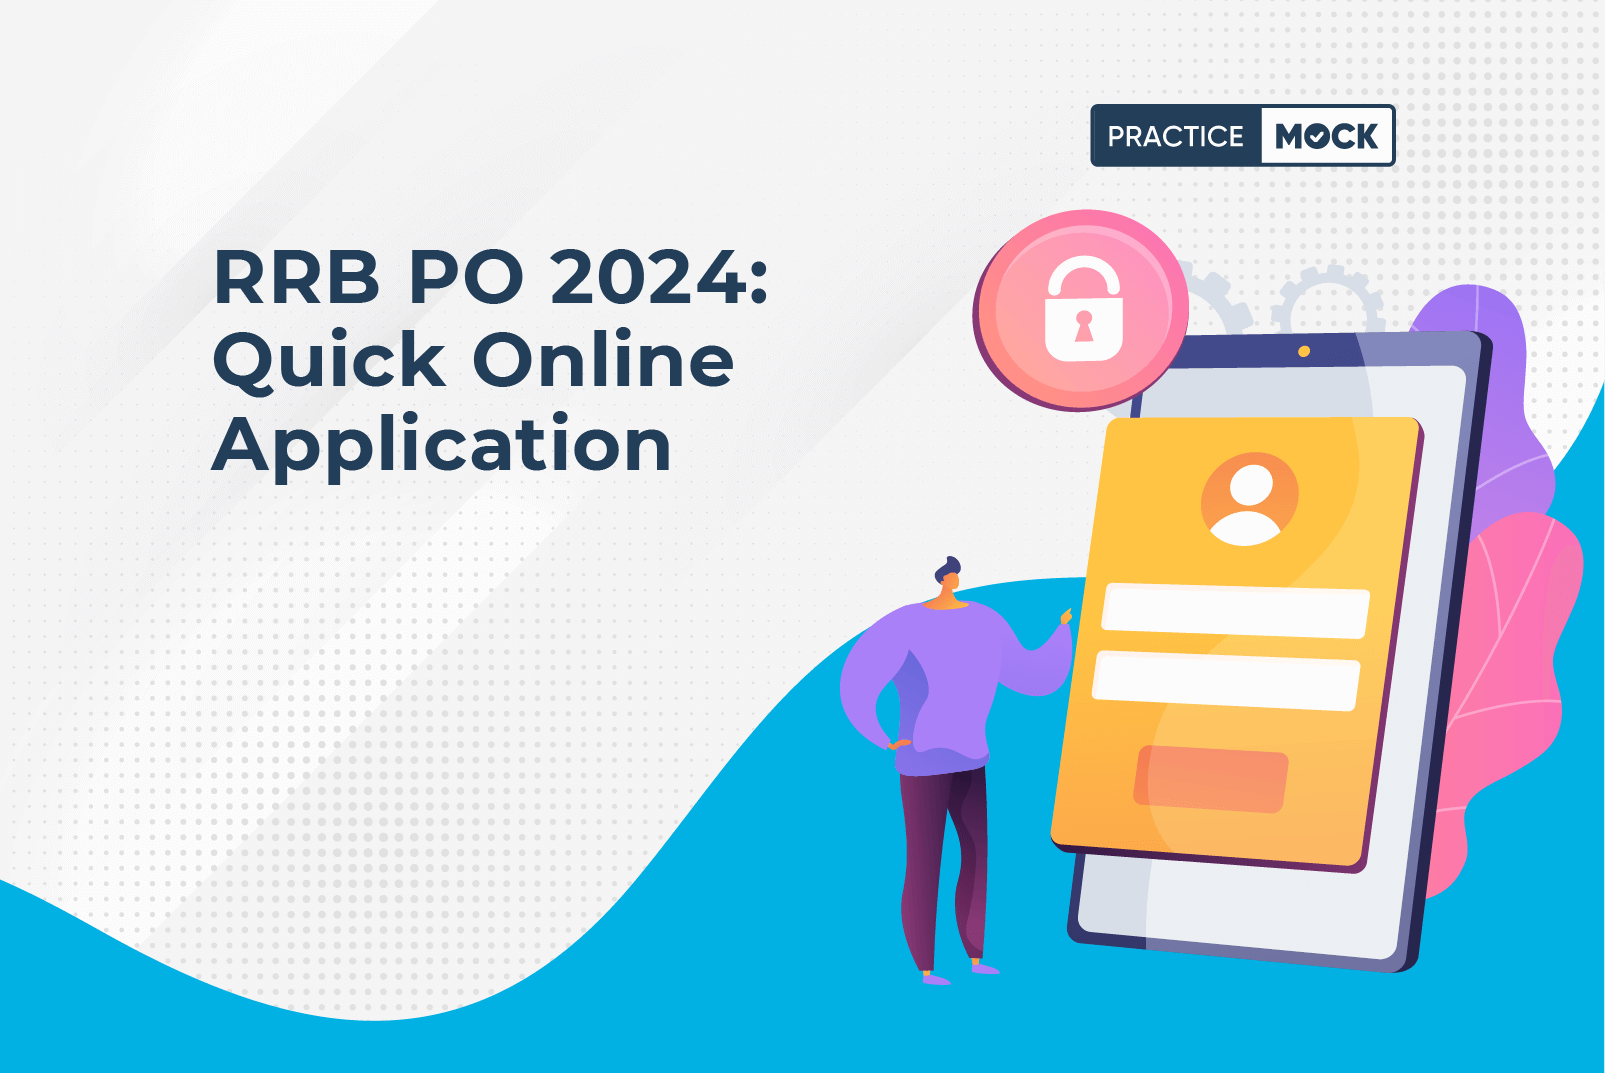 RRB PO 2024: Quick Online Application